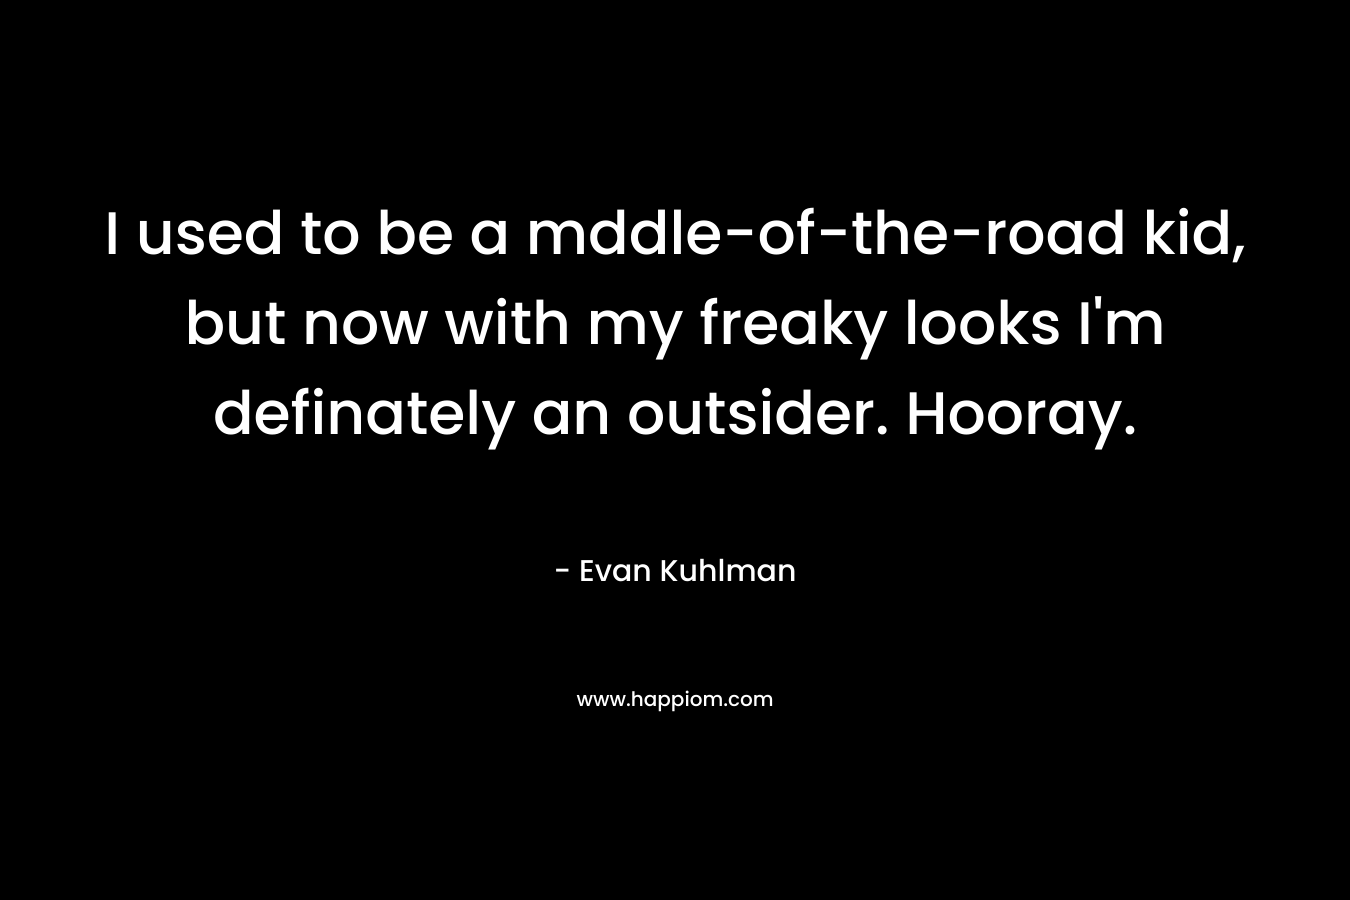 I used to be a mddle-of-the-road kid, but now with my freaky looks I’m definately an outsider. Hooray. – Evan Kuhlman